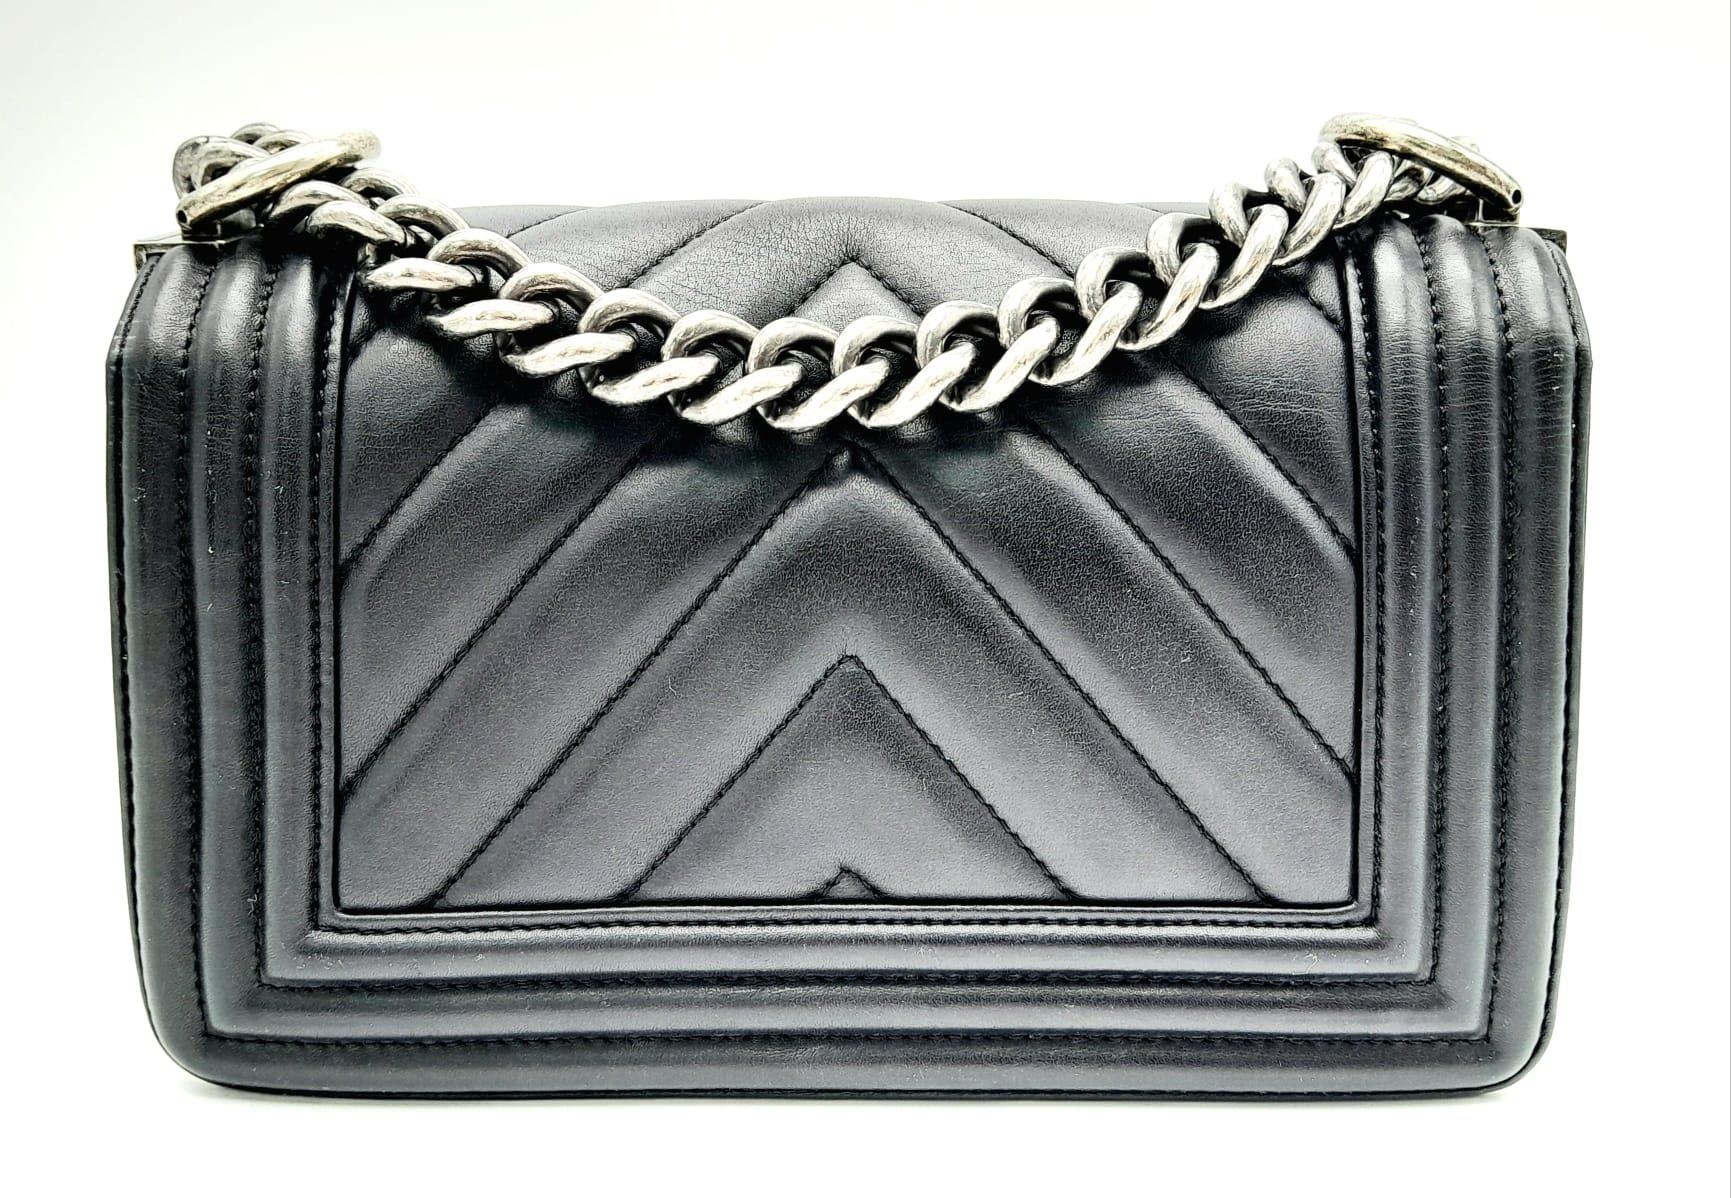 A Chanel Black Leather Boy Bag. Chevron decorative soft black leather with an antique style/finish - Image 5 of 12